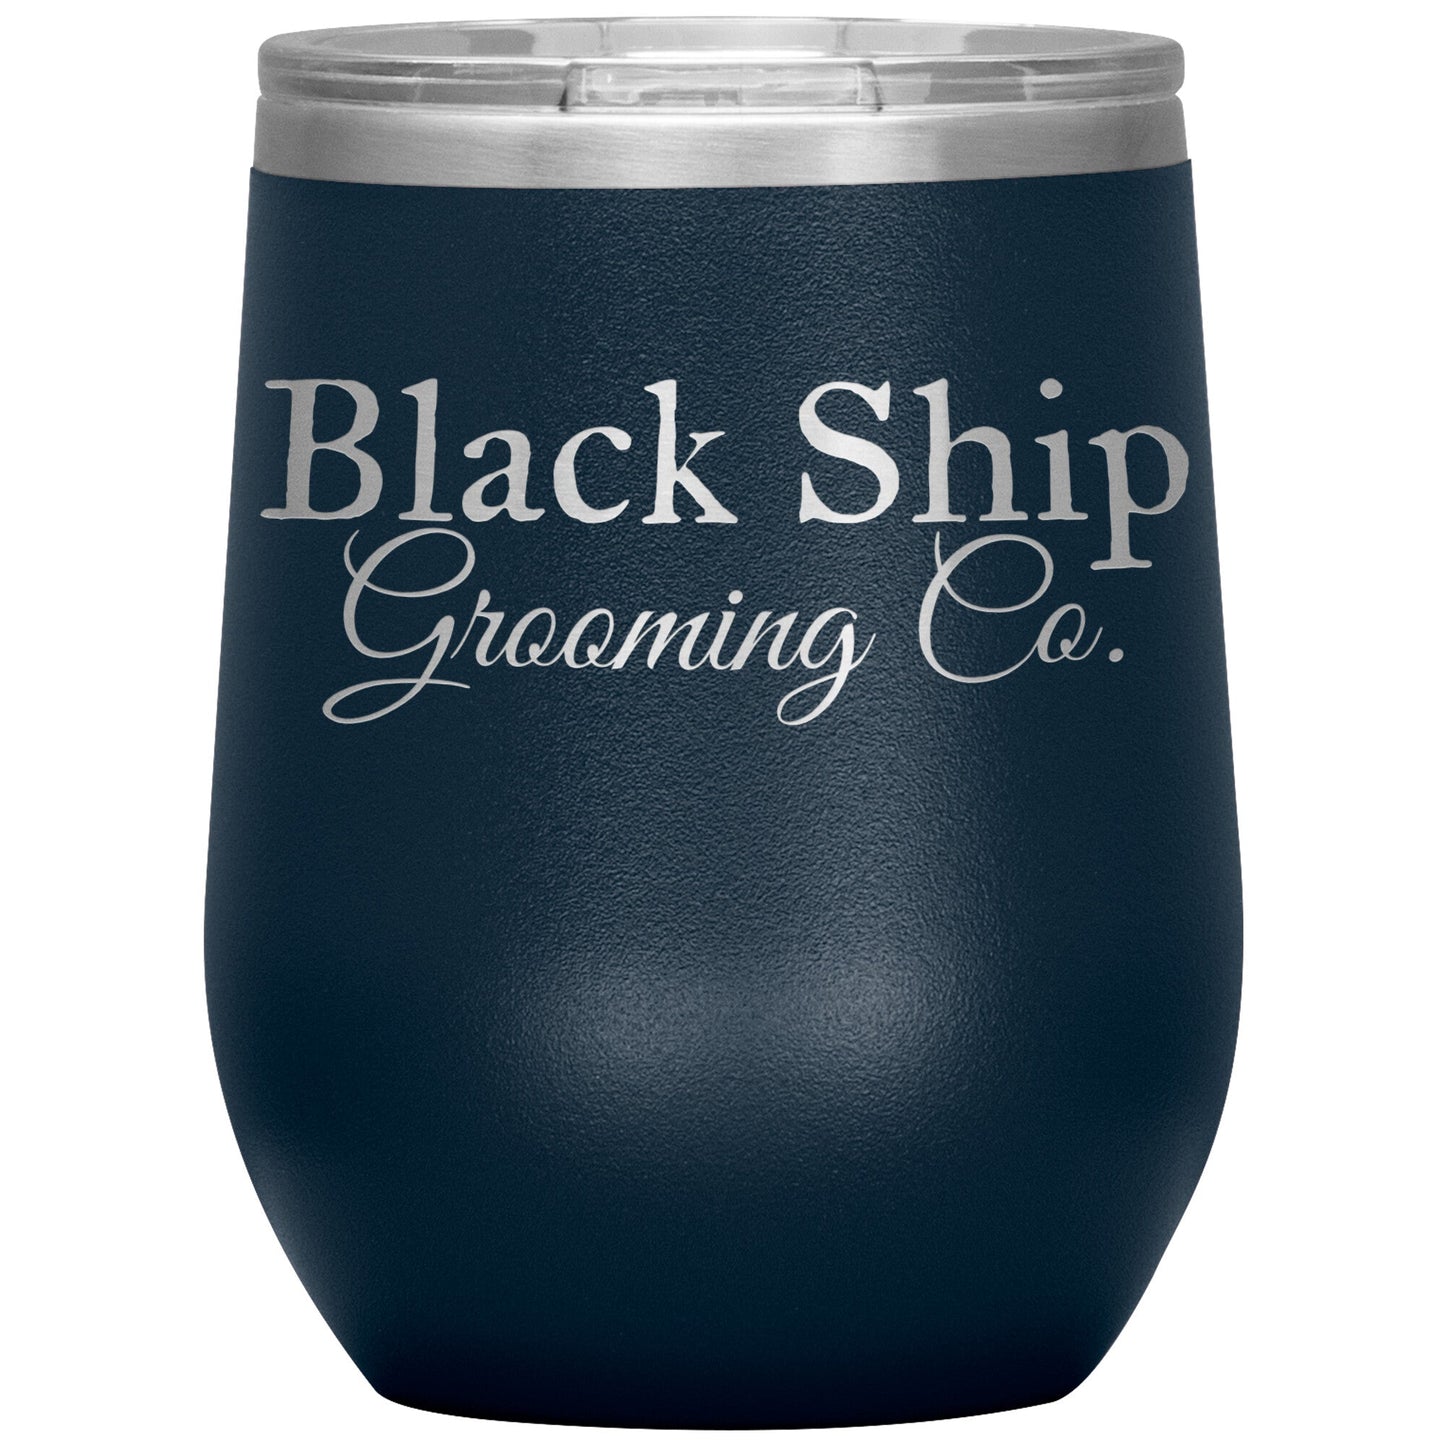 Load image into Gallery viewer, Black Ship Grooming Co. 12oz Insulated Wine Tumbler - Black Ship Grooming Co.
